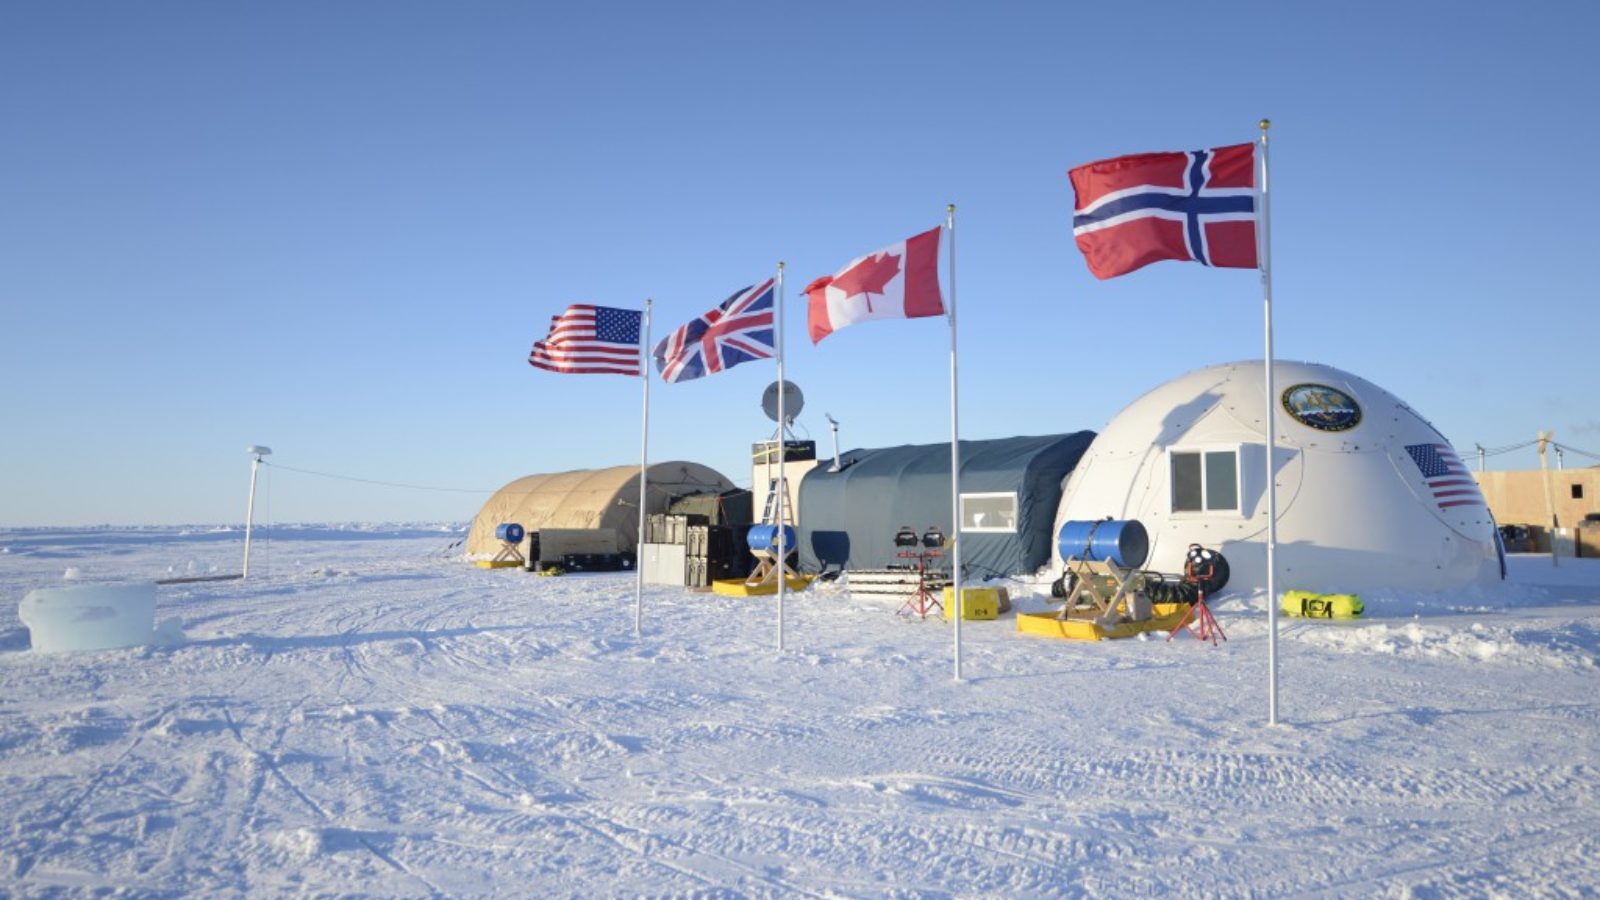 The flags of the U.S., the UK, Norway, and Canada are planted next to each other in the ice outside of a research station in the Arctic.